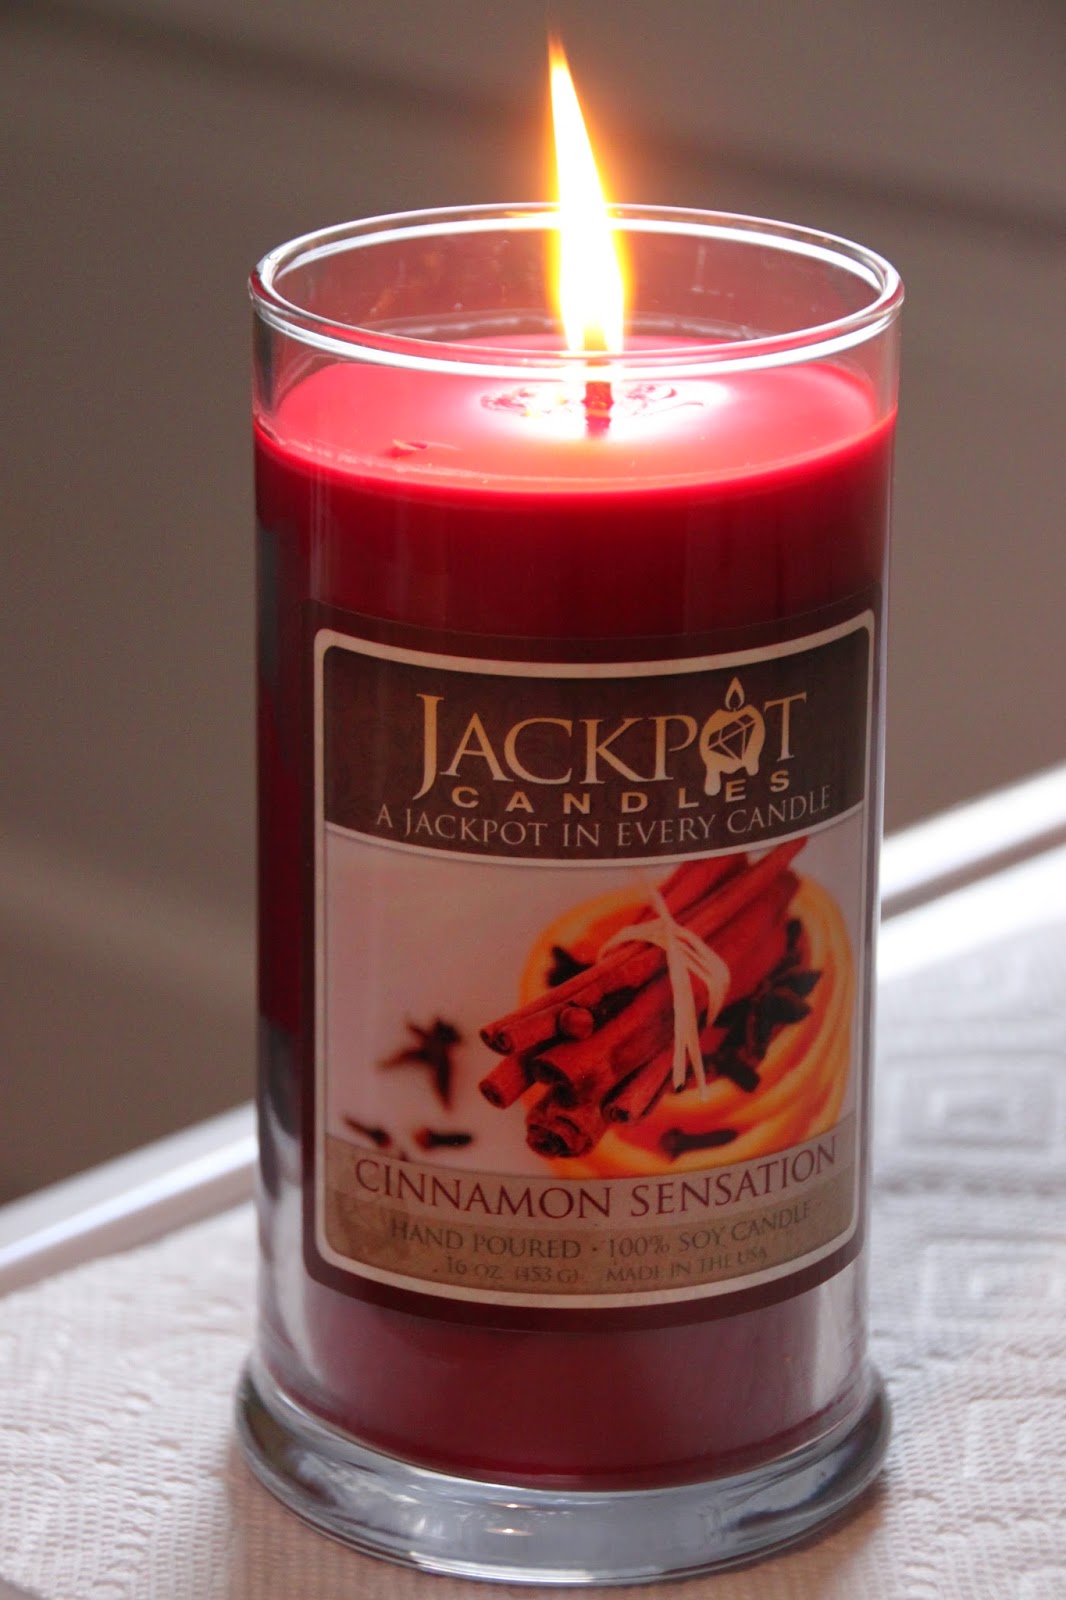 Love You Mom Candle - Jackpot Candles